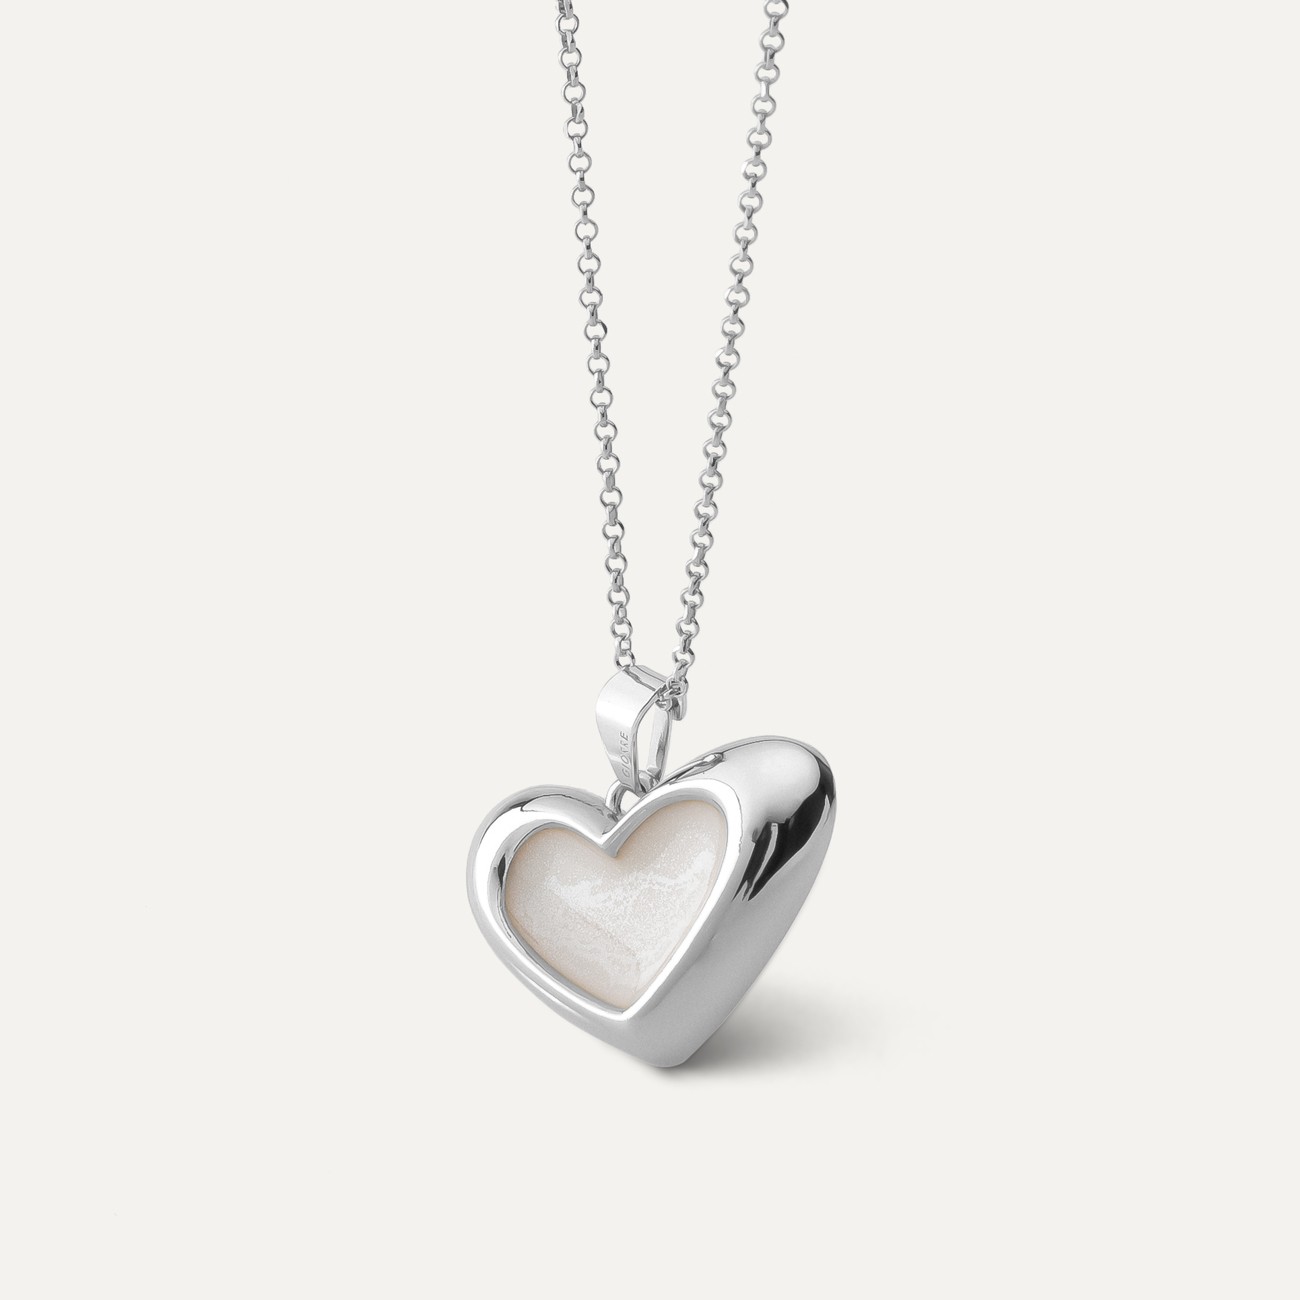 White resin asymmetrical heart necklace, sterling silver 925